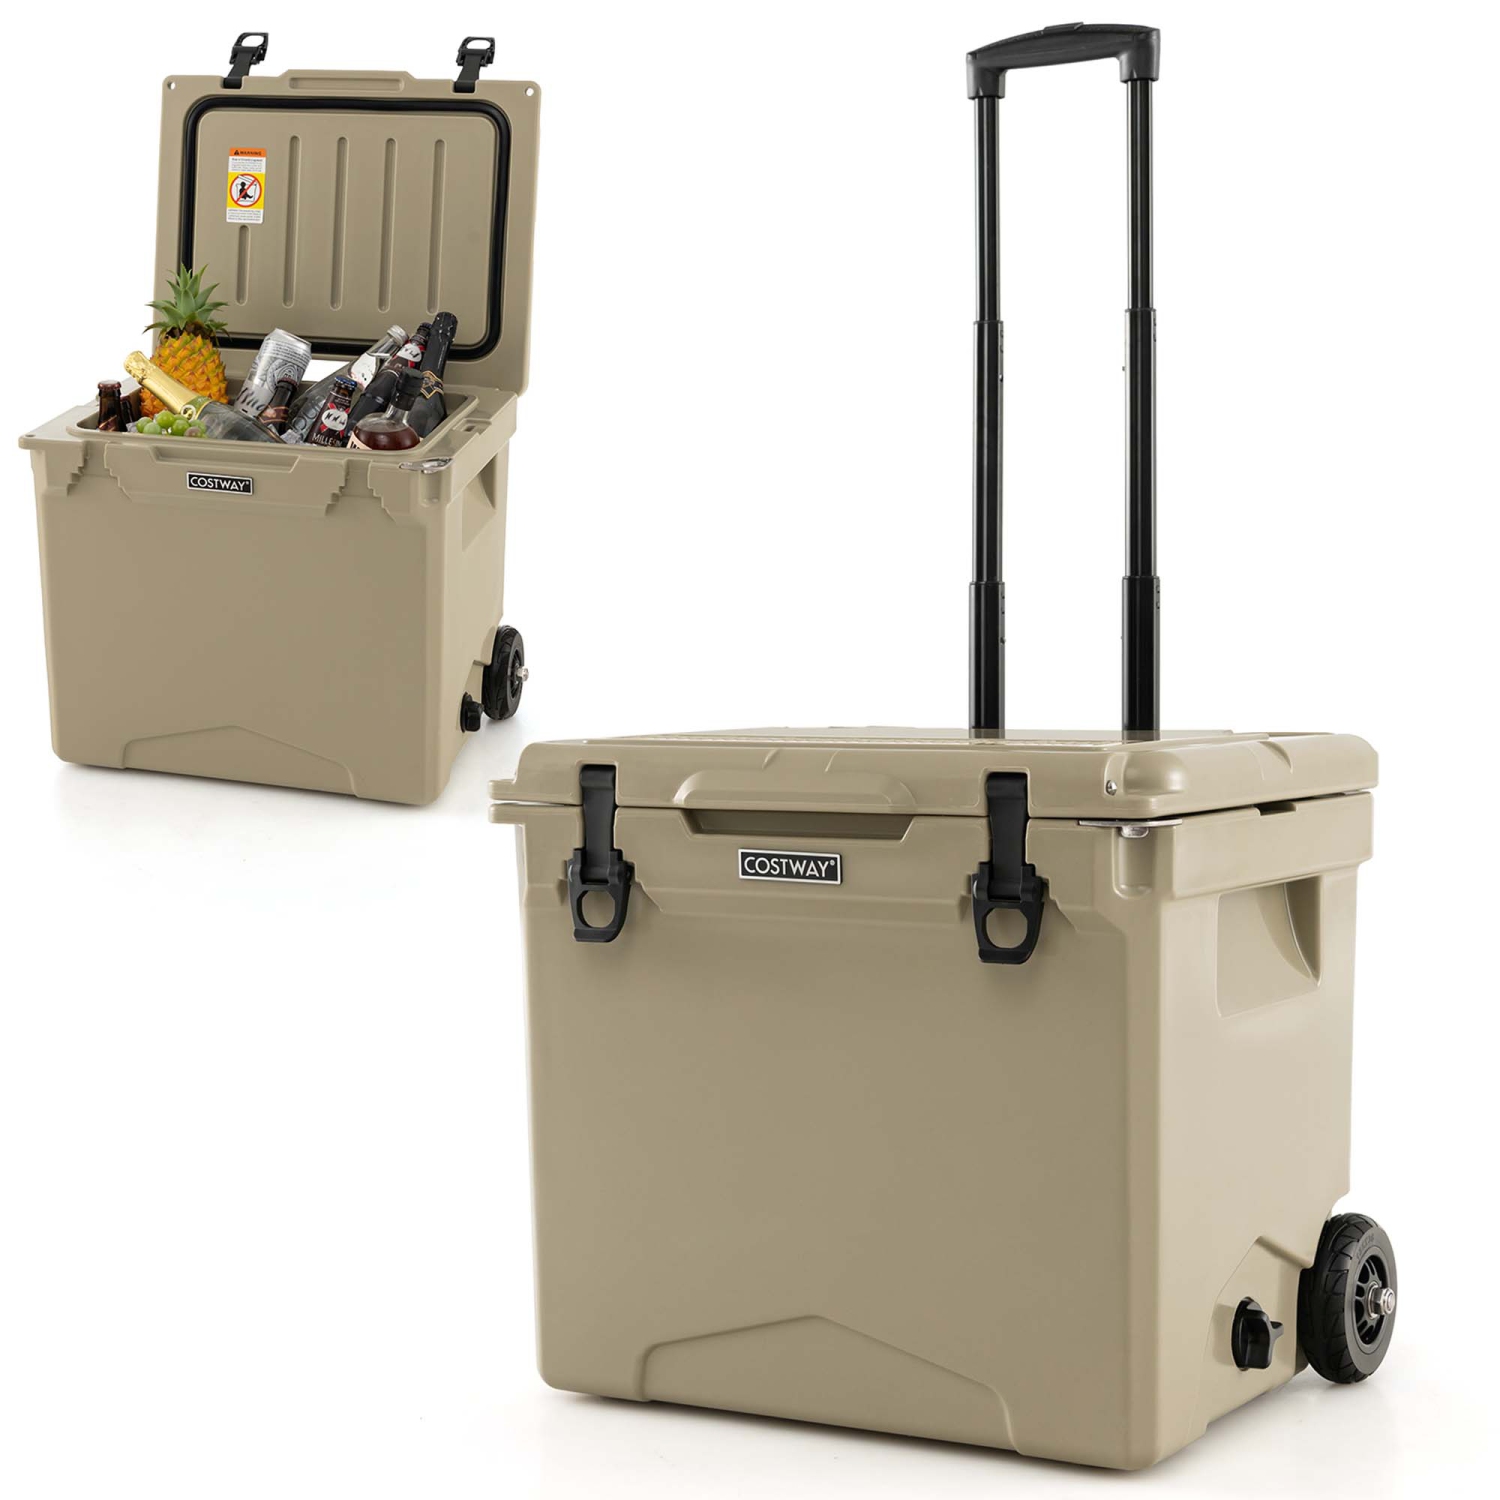 Costway 42 Qt Portable Cooler Roto Molded Ice Chest Insulated 5-7 Days with wheels Handle